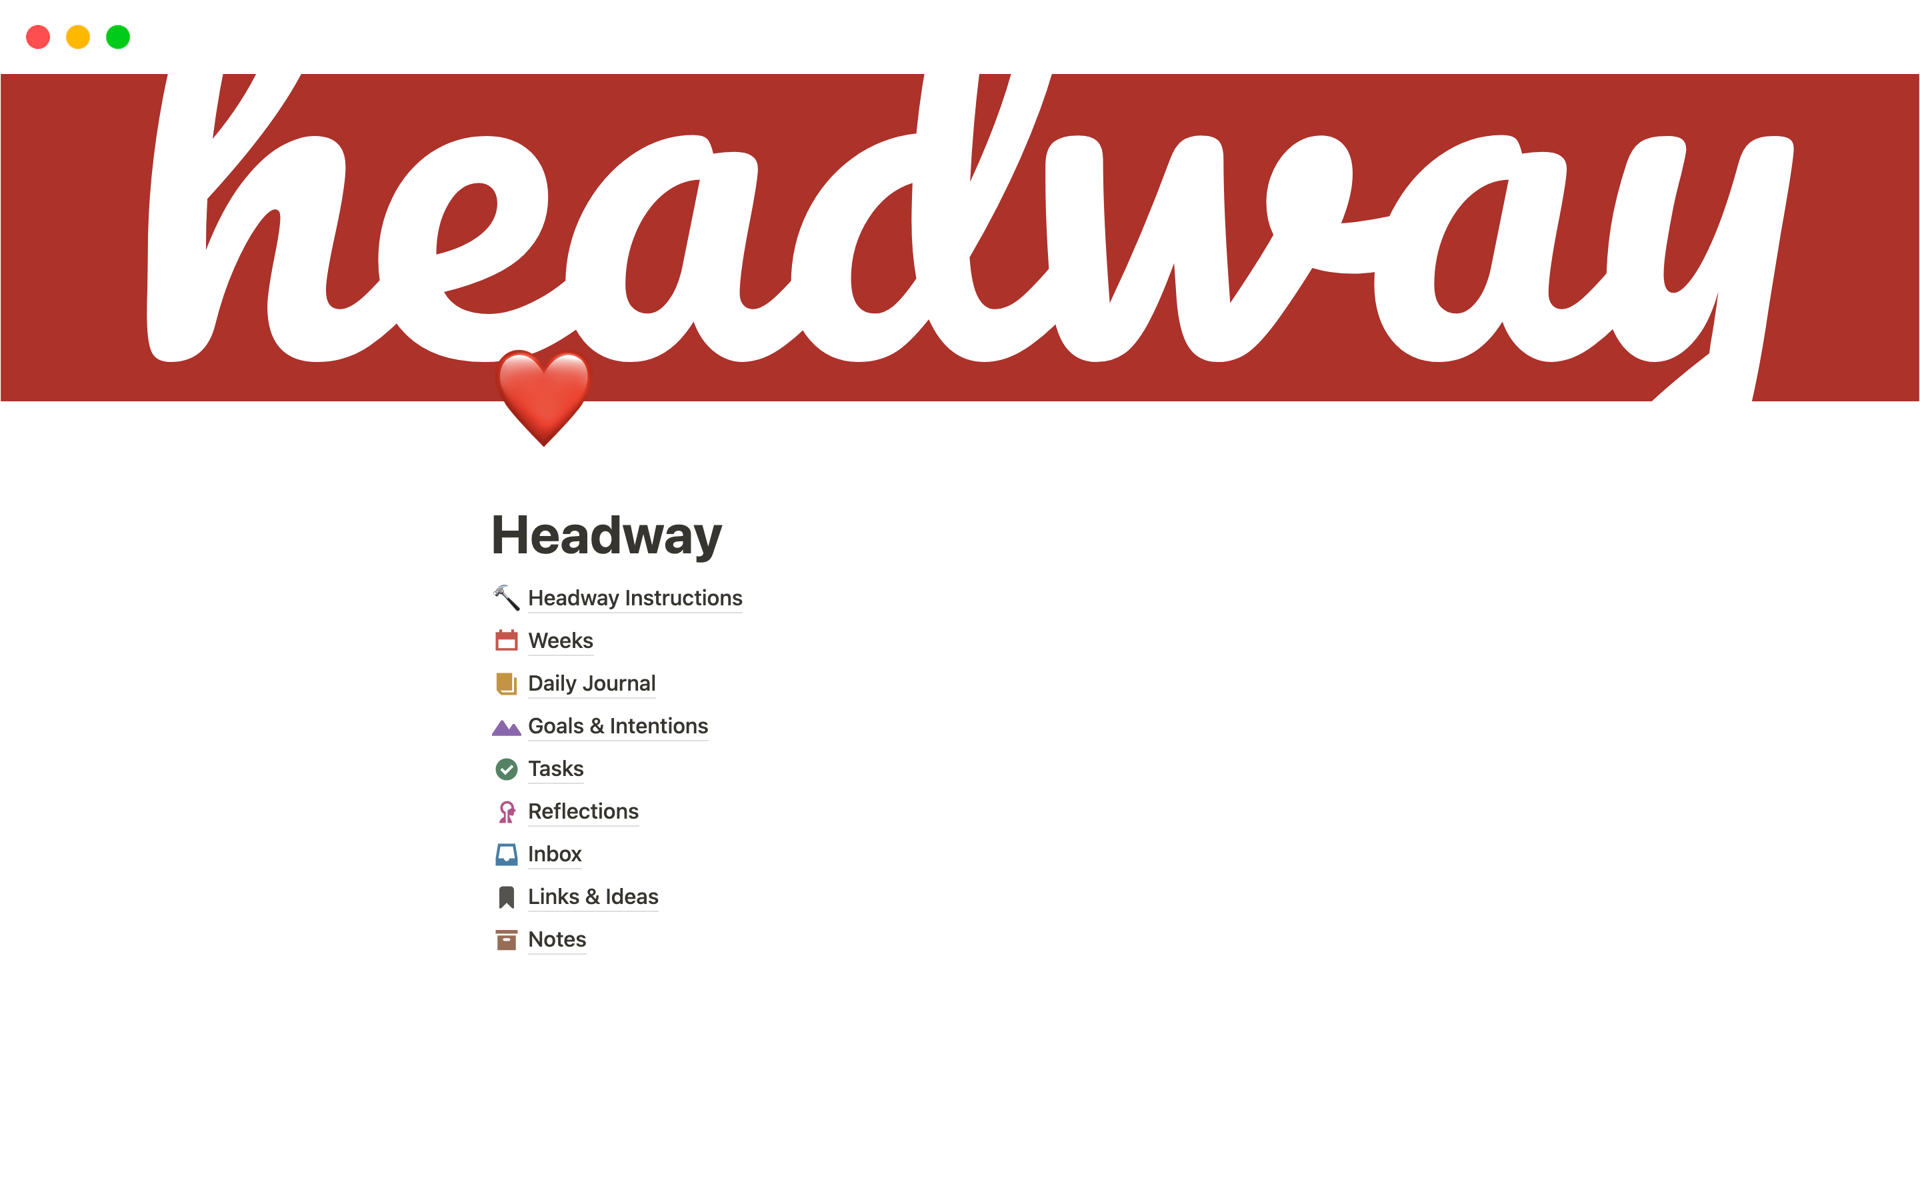 Headway is a daily life and goal tracker designed to help you live with more intention.